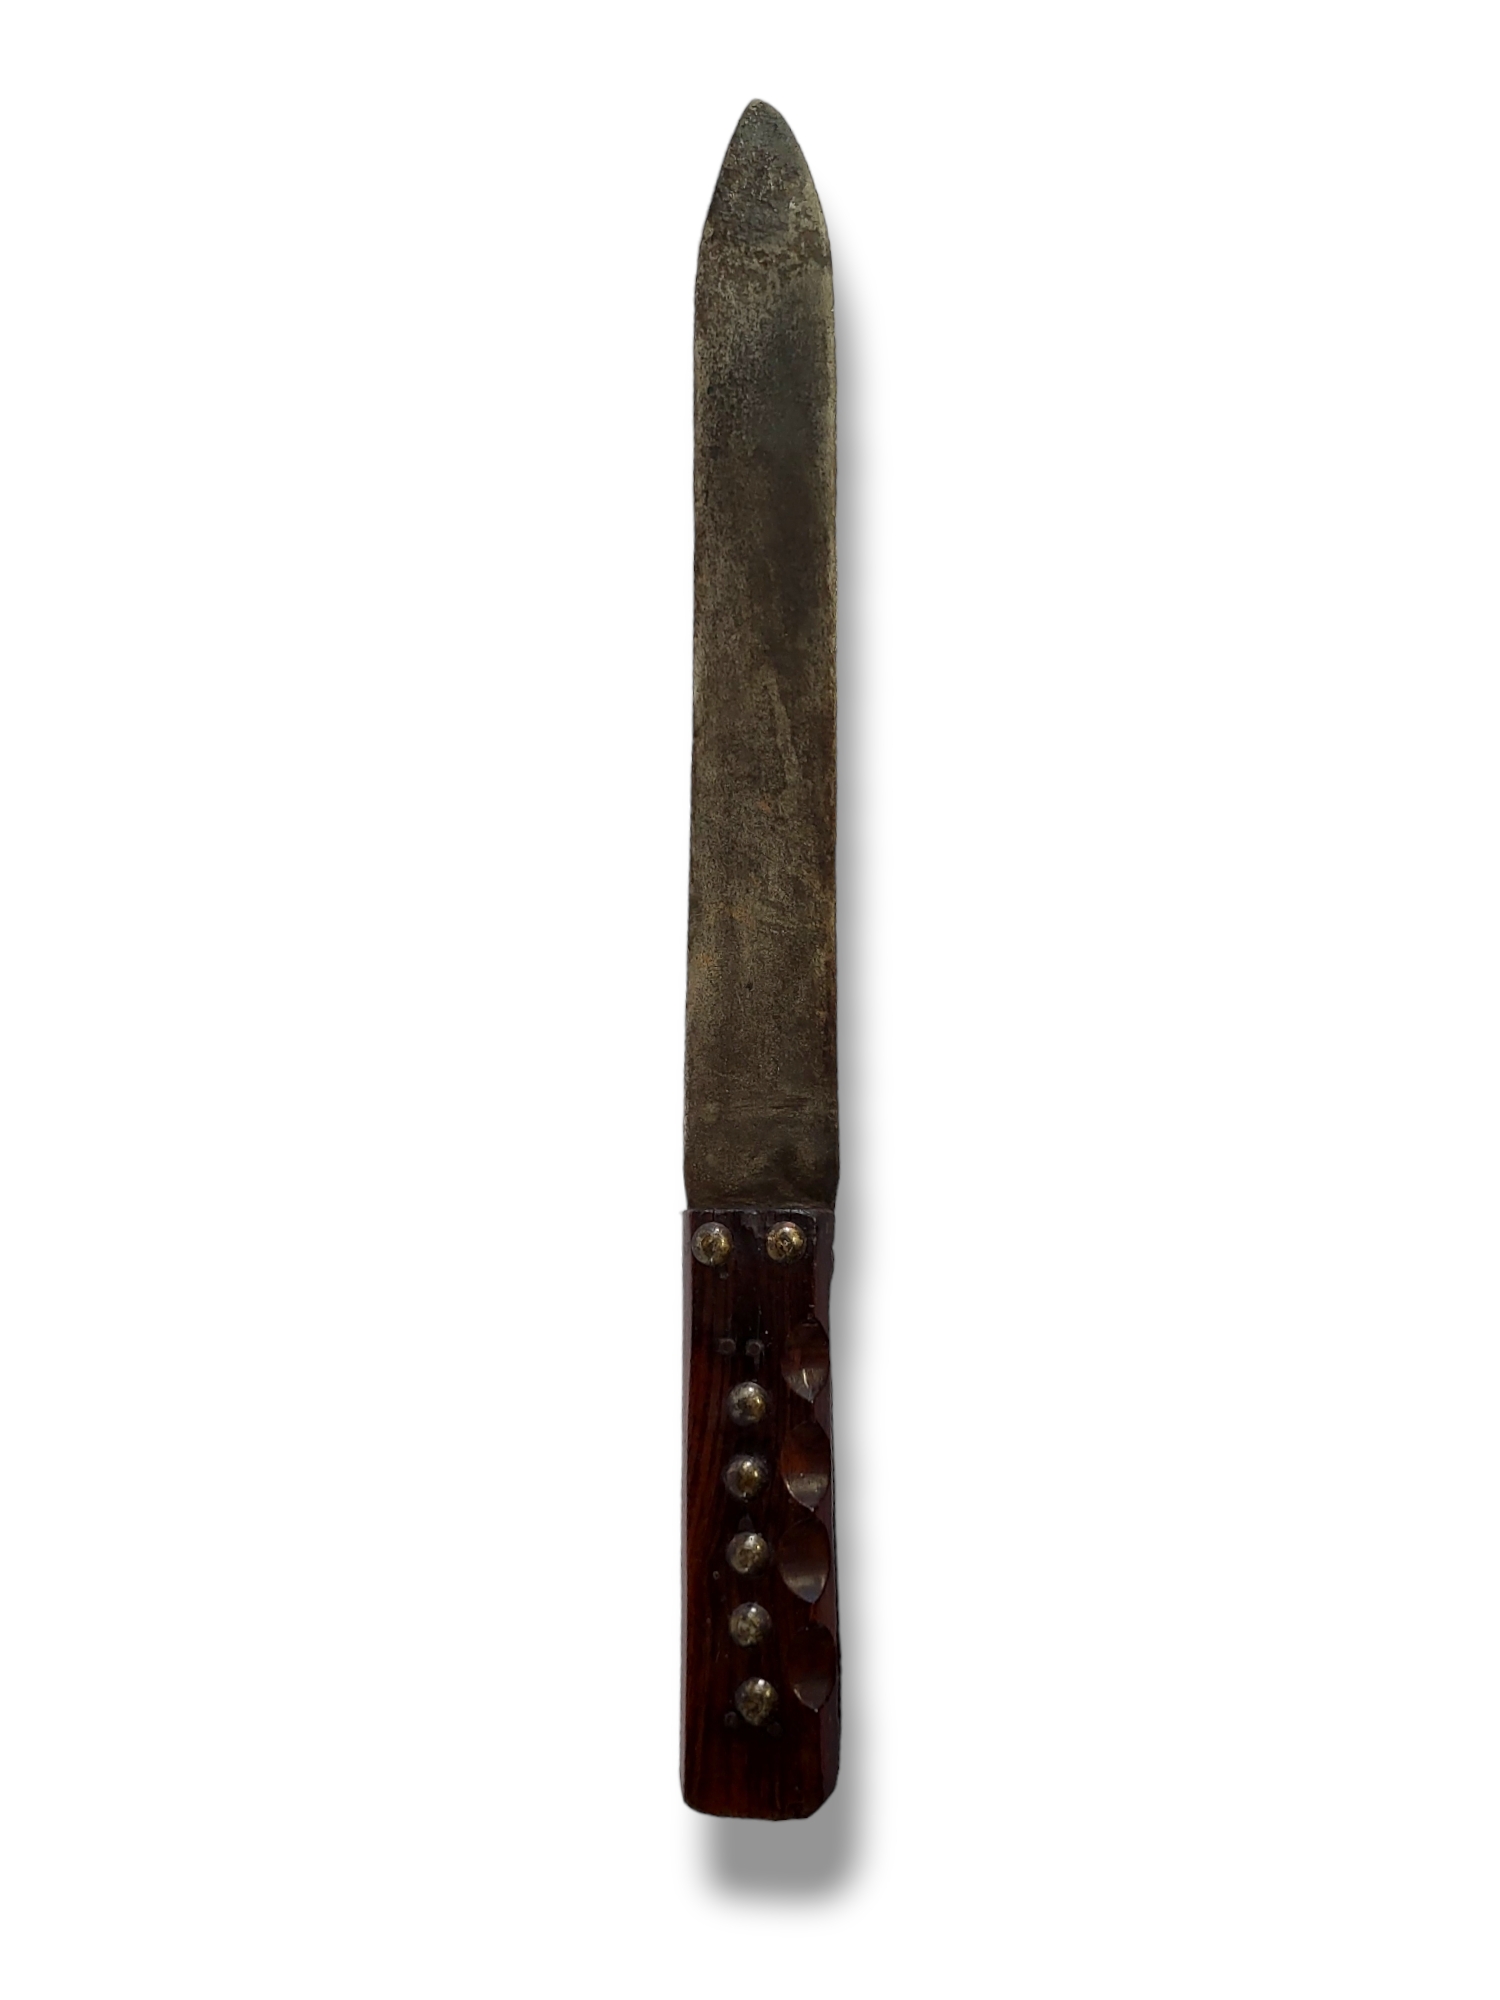 A LATE 19TH CENTURY NORTH AMERICAN INDIAN DOUBLE EDGED FIGHTING KNIFE The hardwood grip with stud